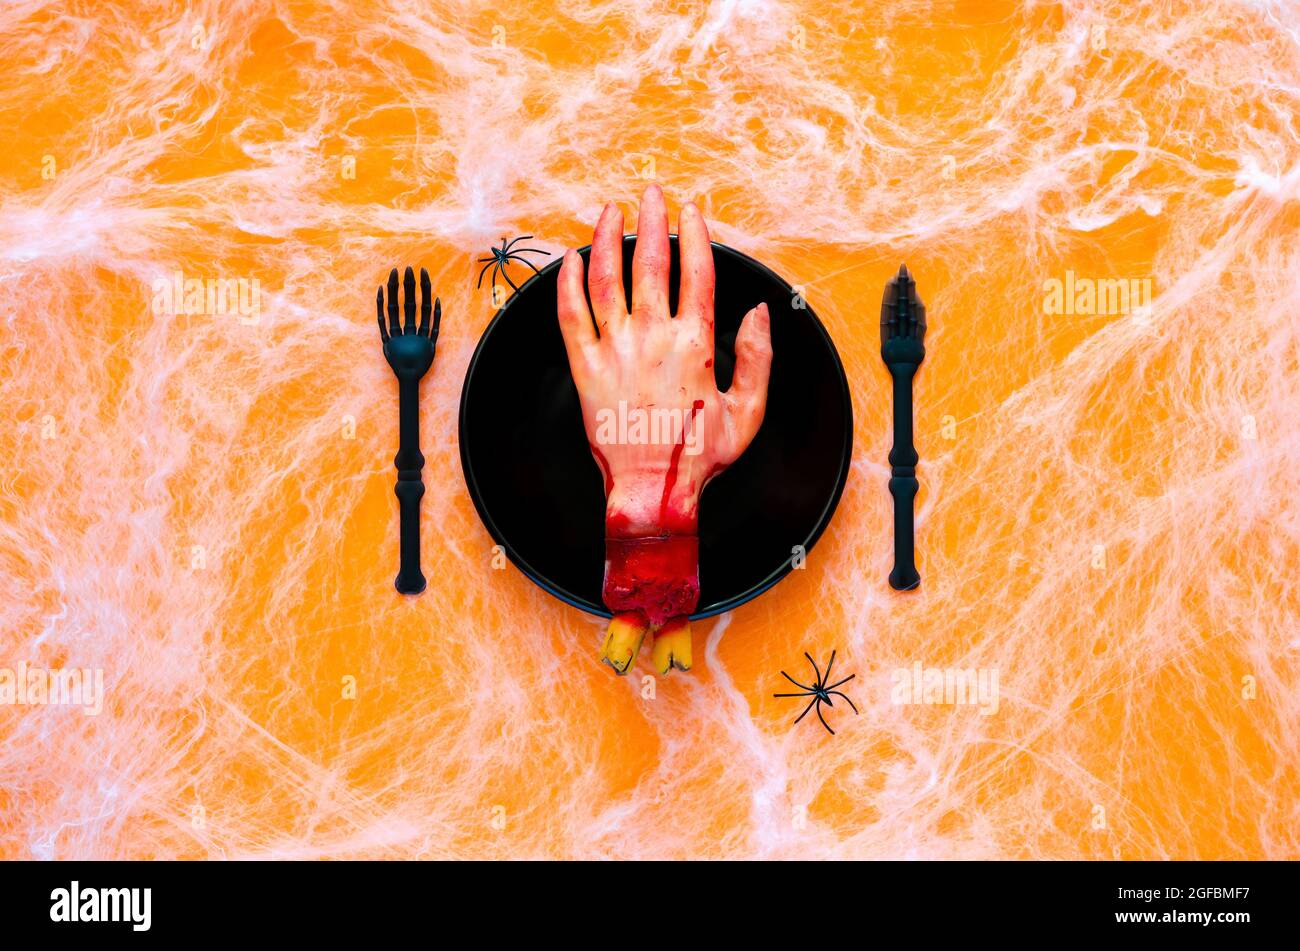 Scary halloween dinner party concept with fake cutting hand on black plate, knife and fork with spider and cobweb on orange background. Stock Photo